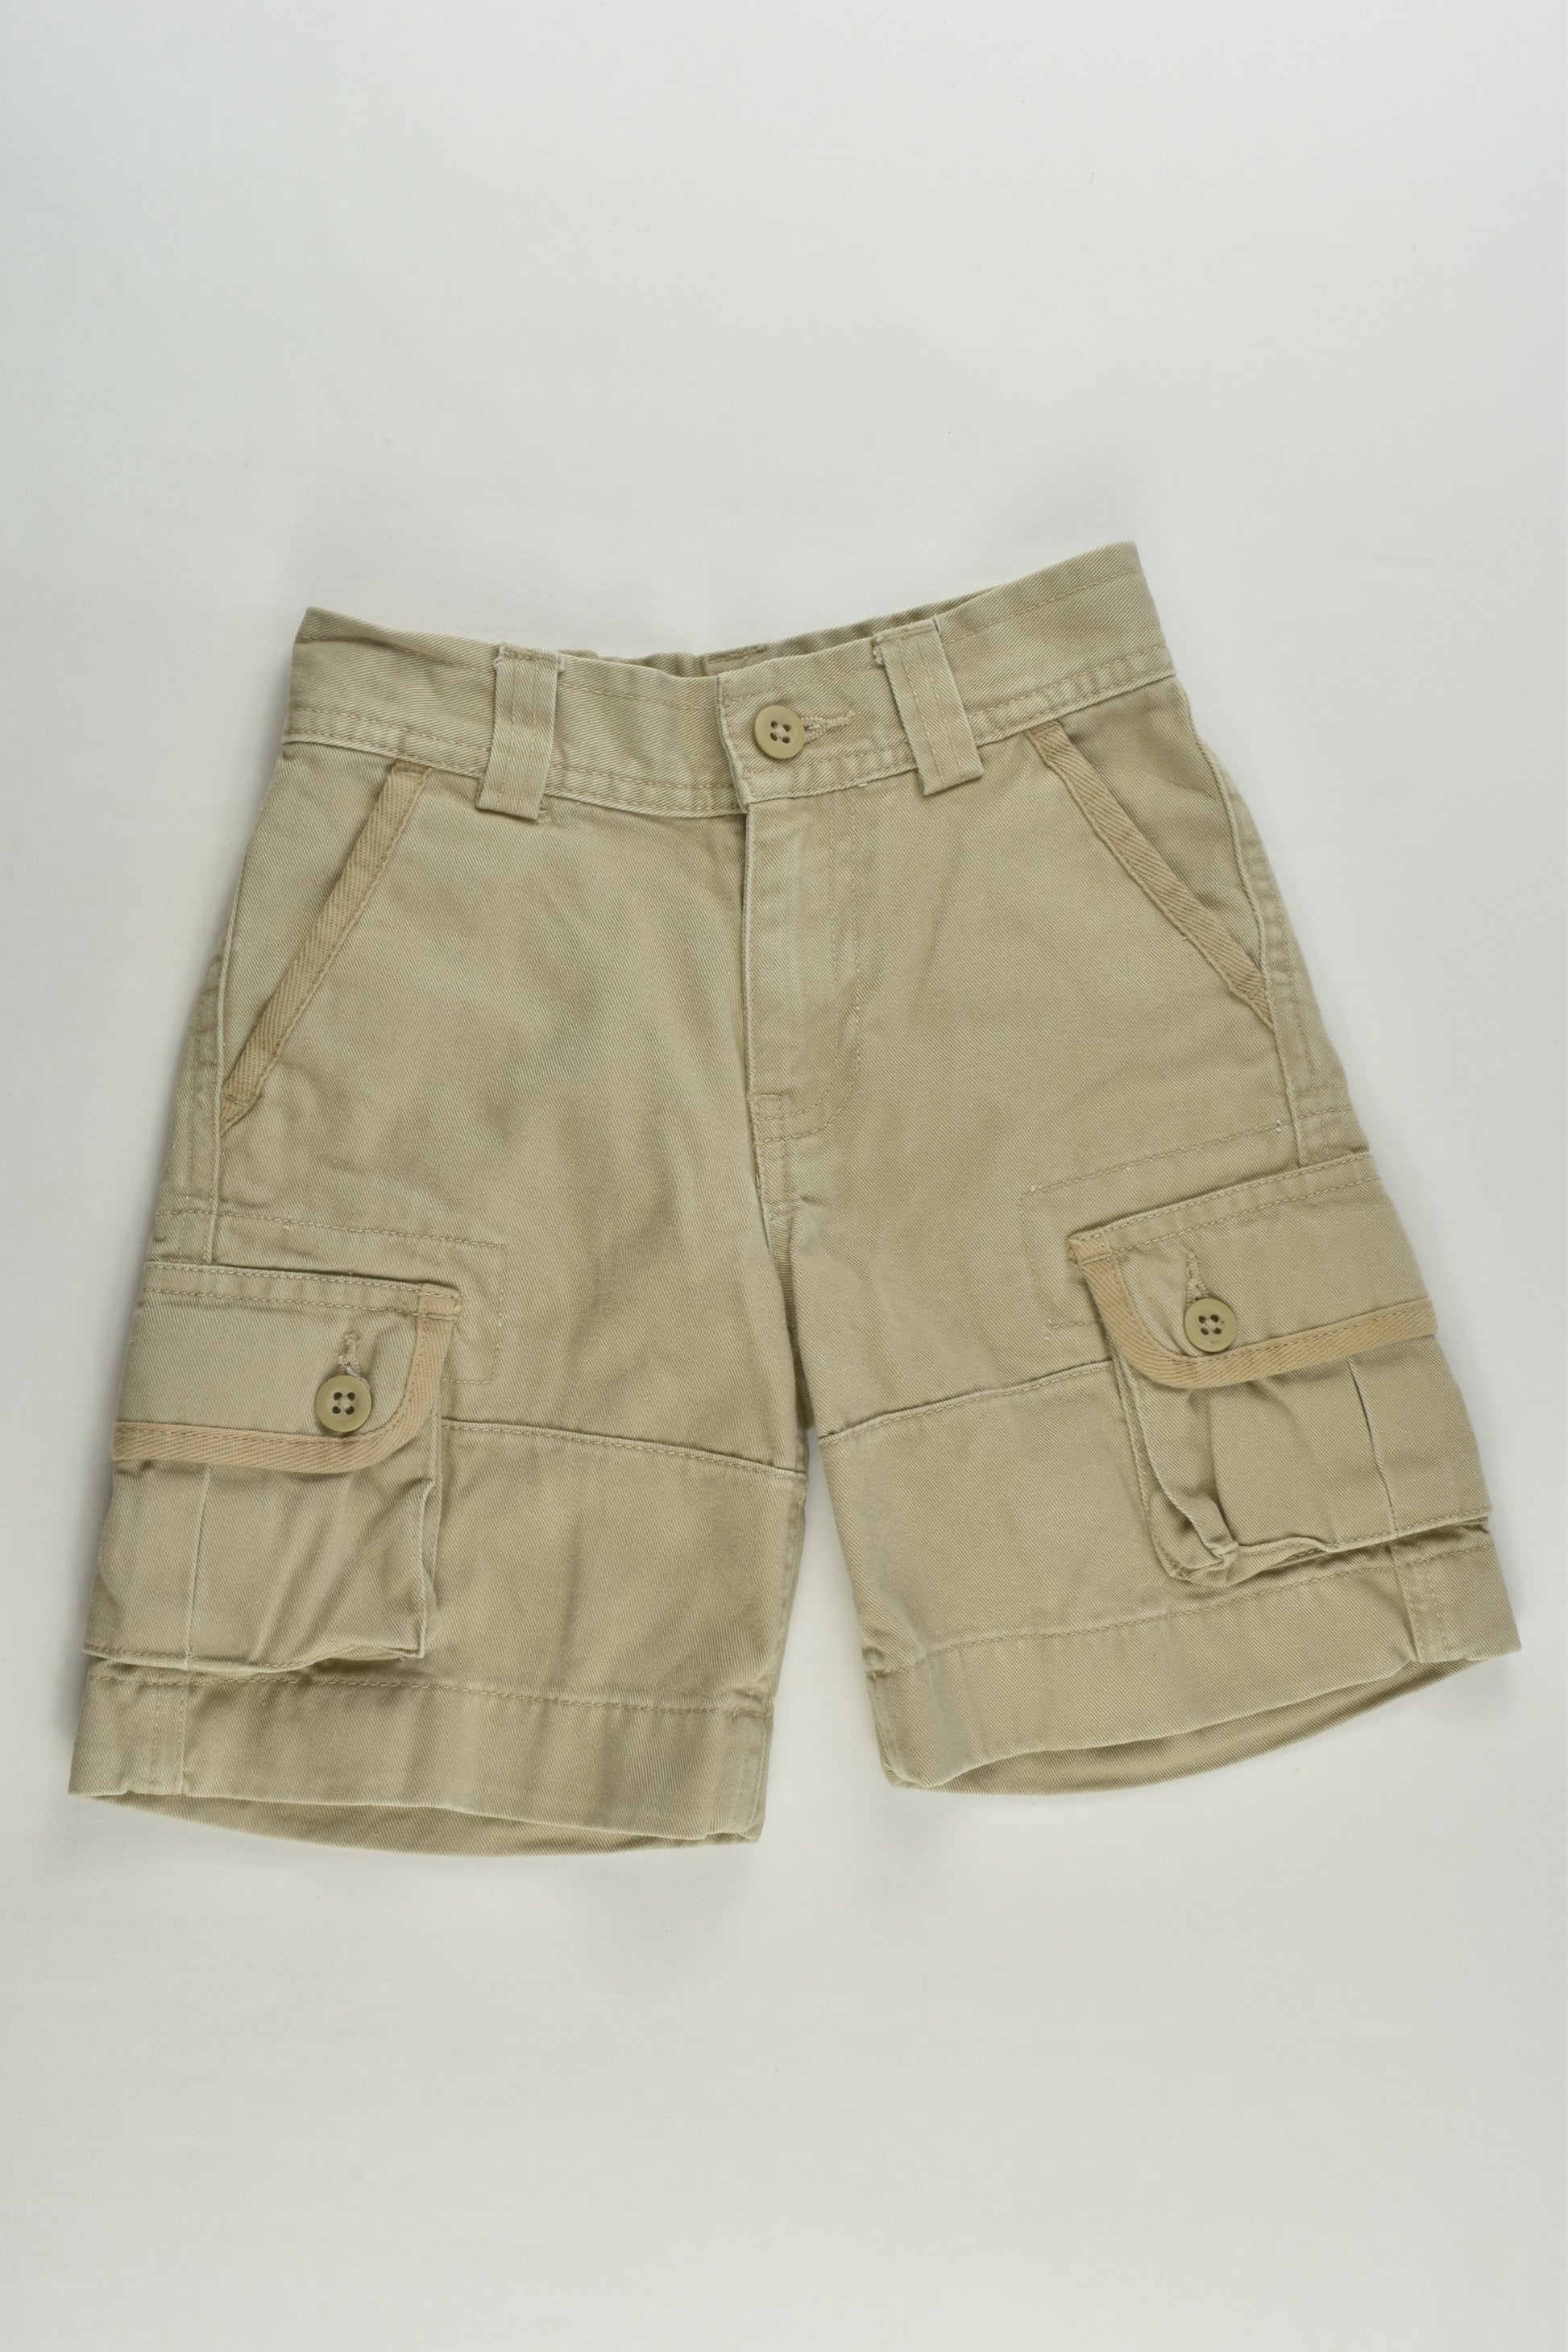 Polo by Ralph Lauren Size 2 Shorts